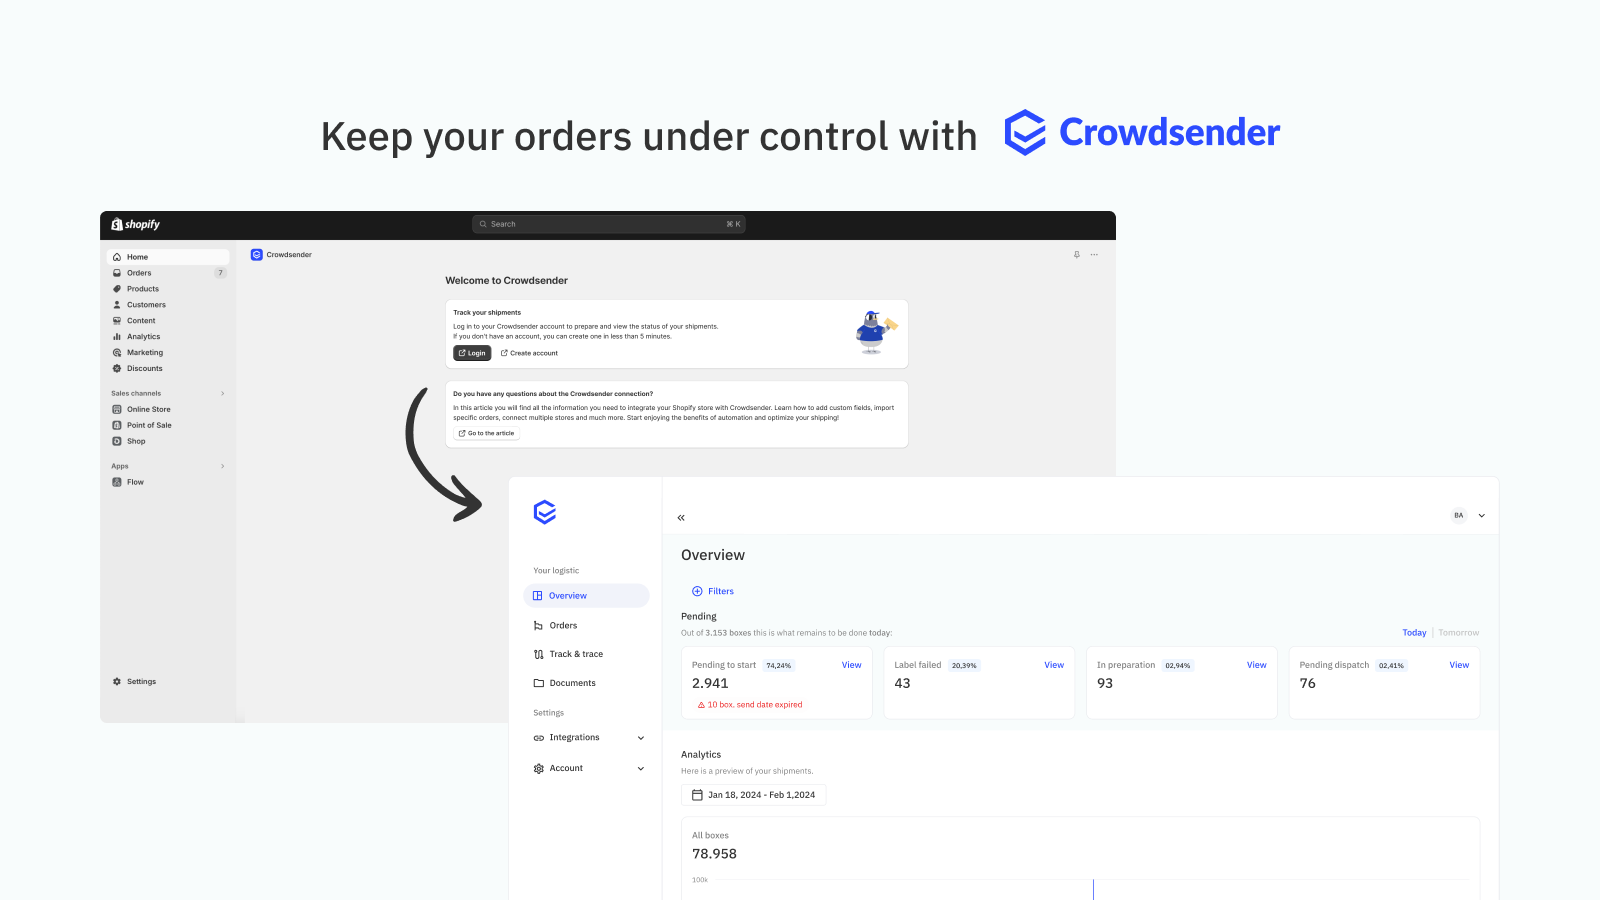 Keep your orders under control with Crowdsender